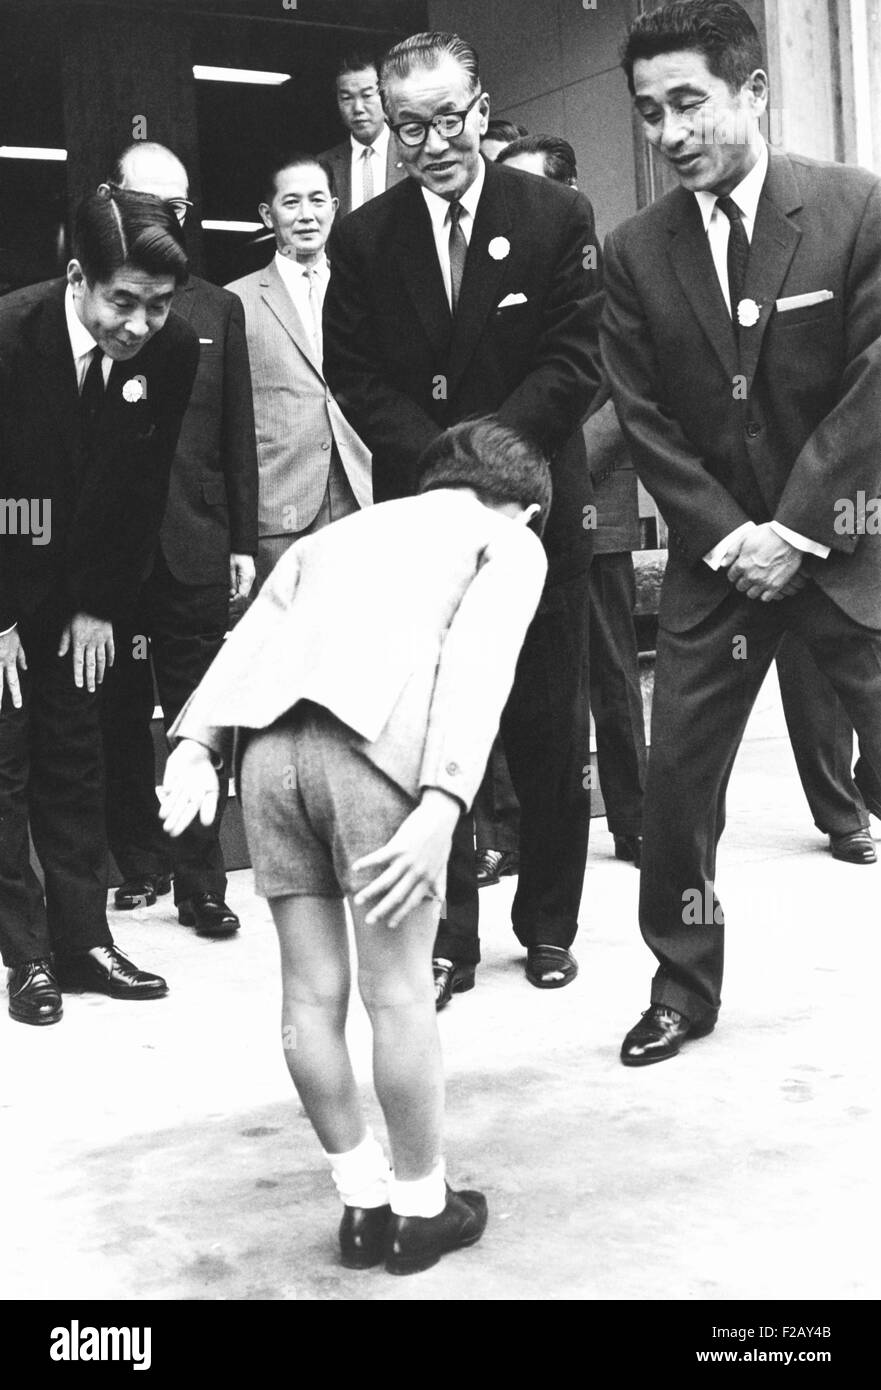 Prince Hiro bows before Orie Kitajima (center), President of the Dainippon Printing Company. Oct. 11, 1967. The Prince inspected huge machines and printing processes for his social studies in school (CSU 2015 9 864) Stock Photo